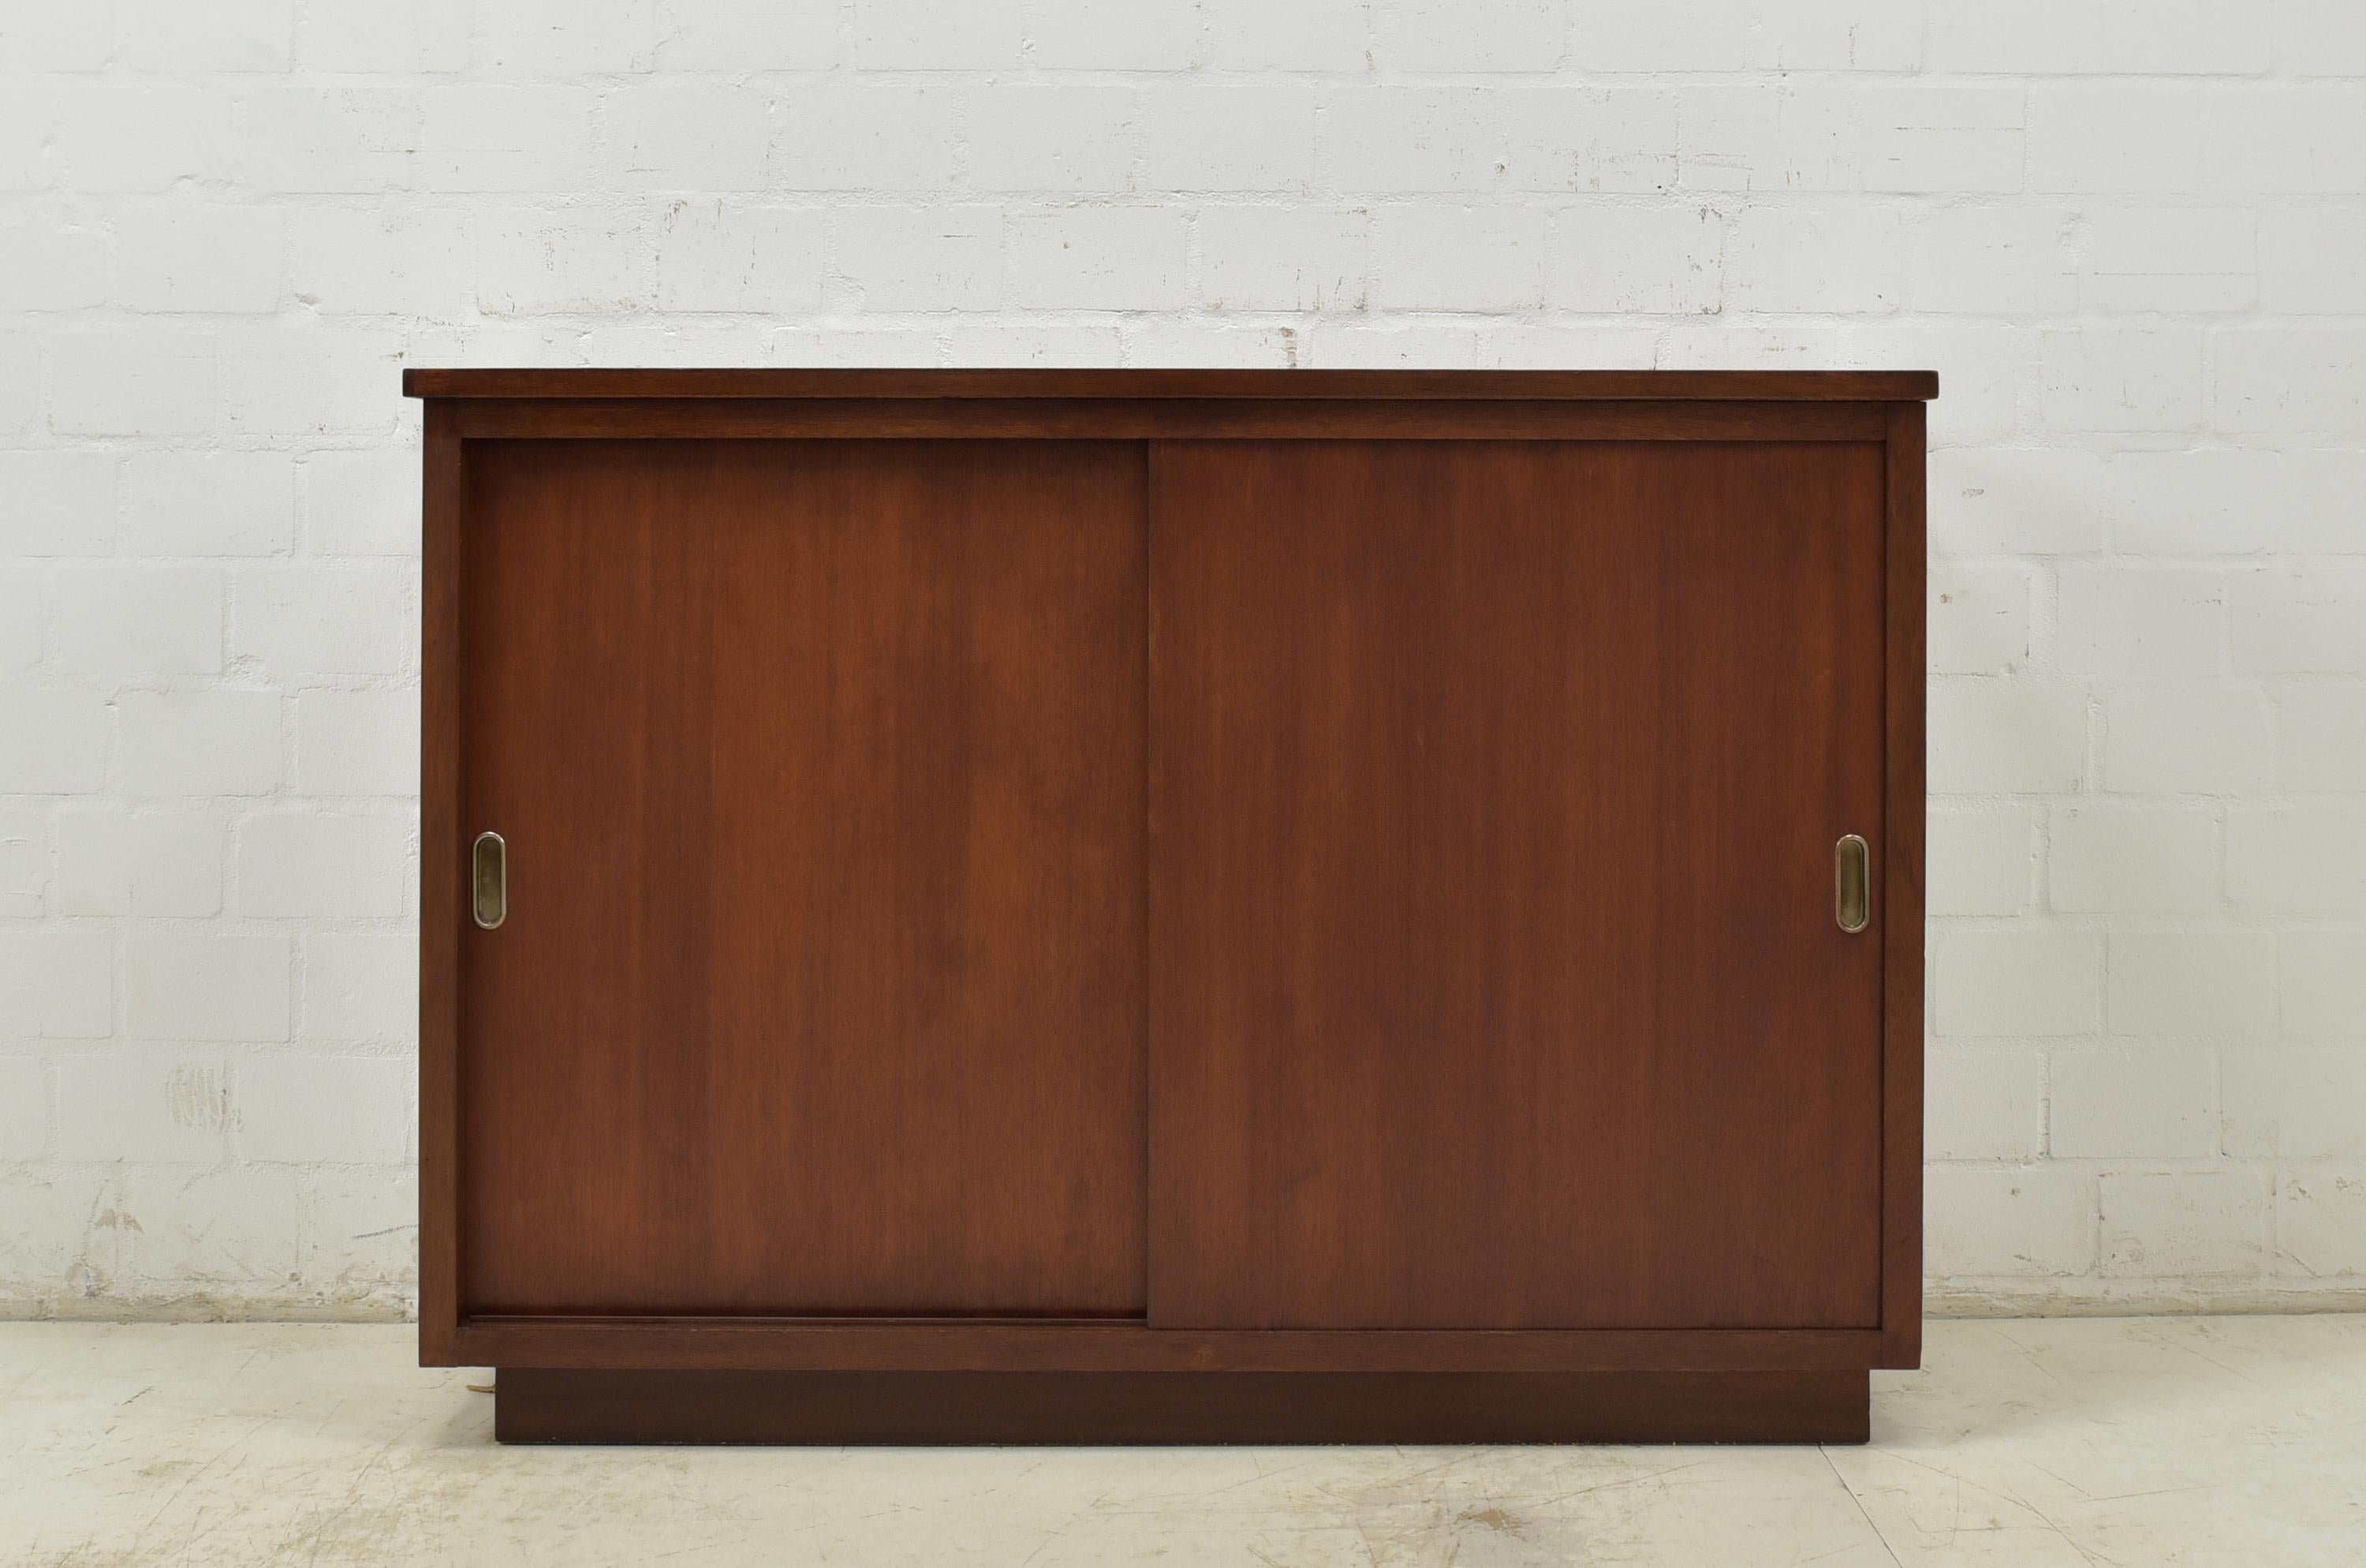 Sliding door sideboard restored circa 1950 office cabinet filing cabinet

Features:
Model with two sliding doors and two shelves
High quality
Height-adjustable solid wood shelves
Smooth sliding mechanism
Appealing, timelessly beautiful